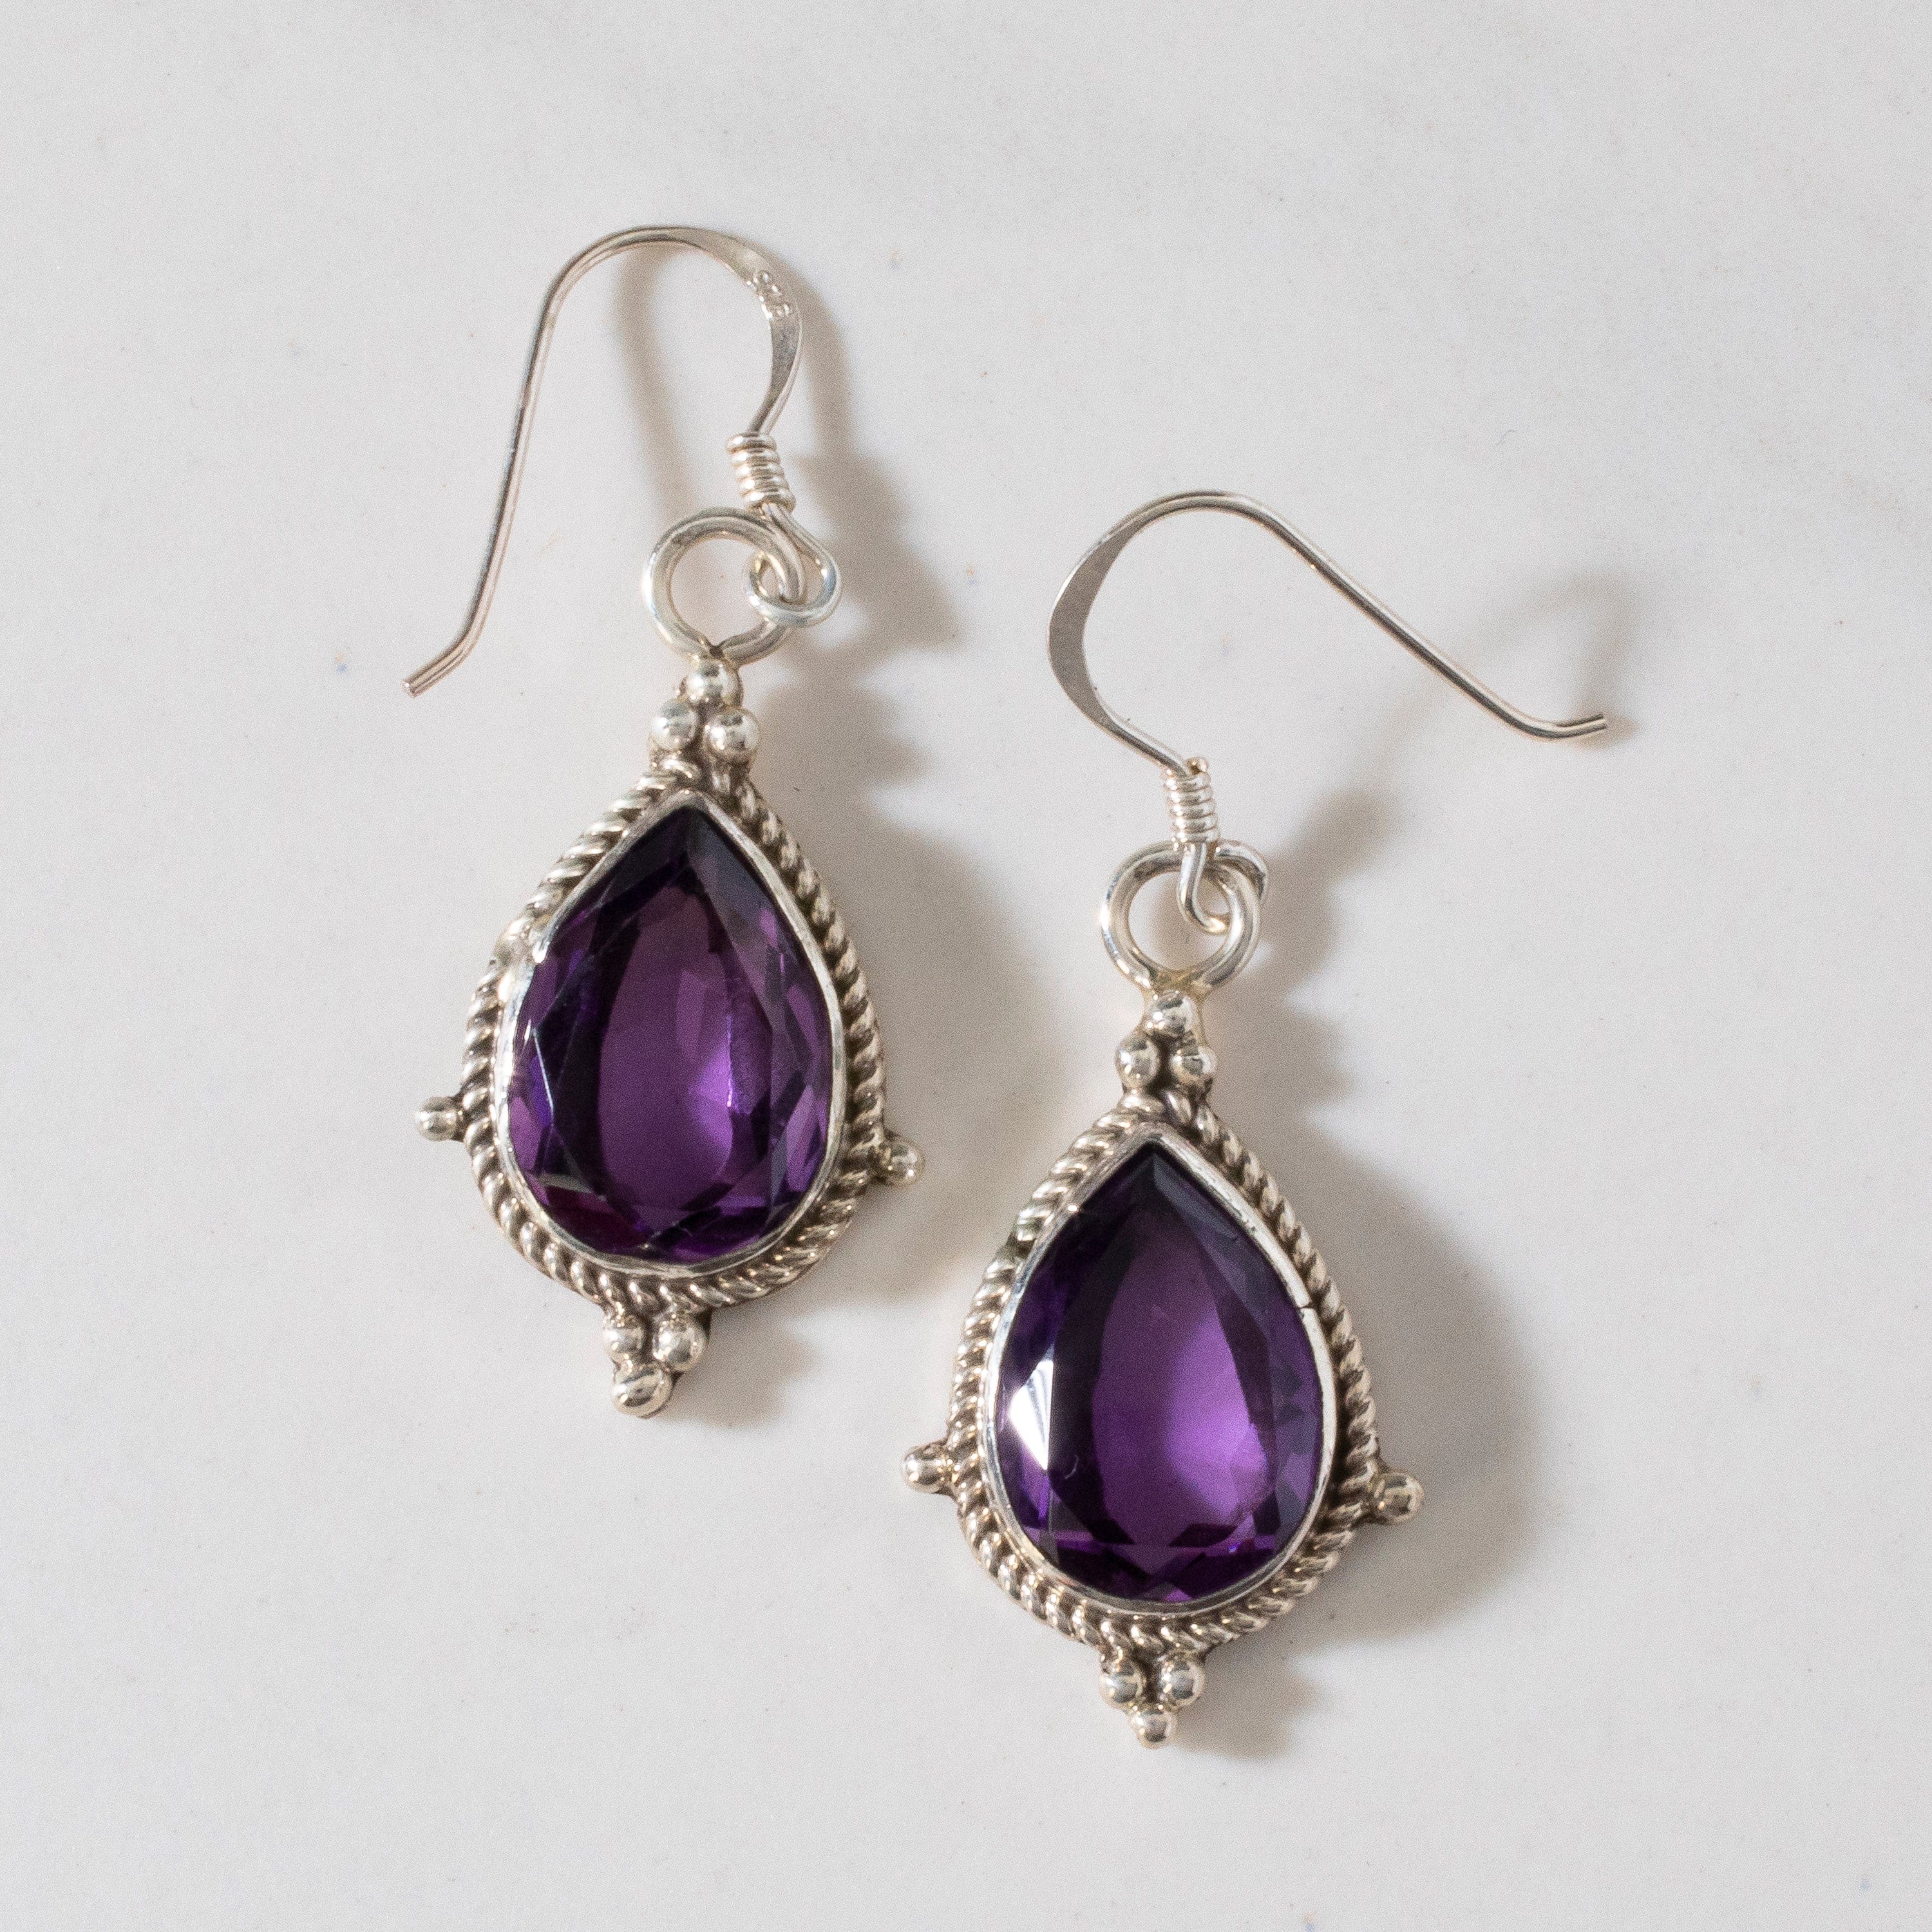 Kalifano Native American Jewelry Amethyst Teardrop Navajo USA Native American Made 925 Sterling Silver Earrings with French Hook NAE500.008